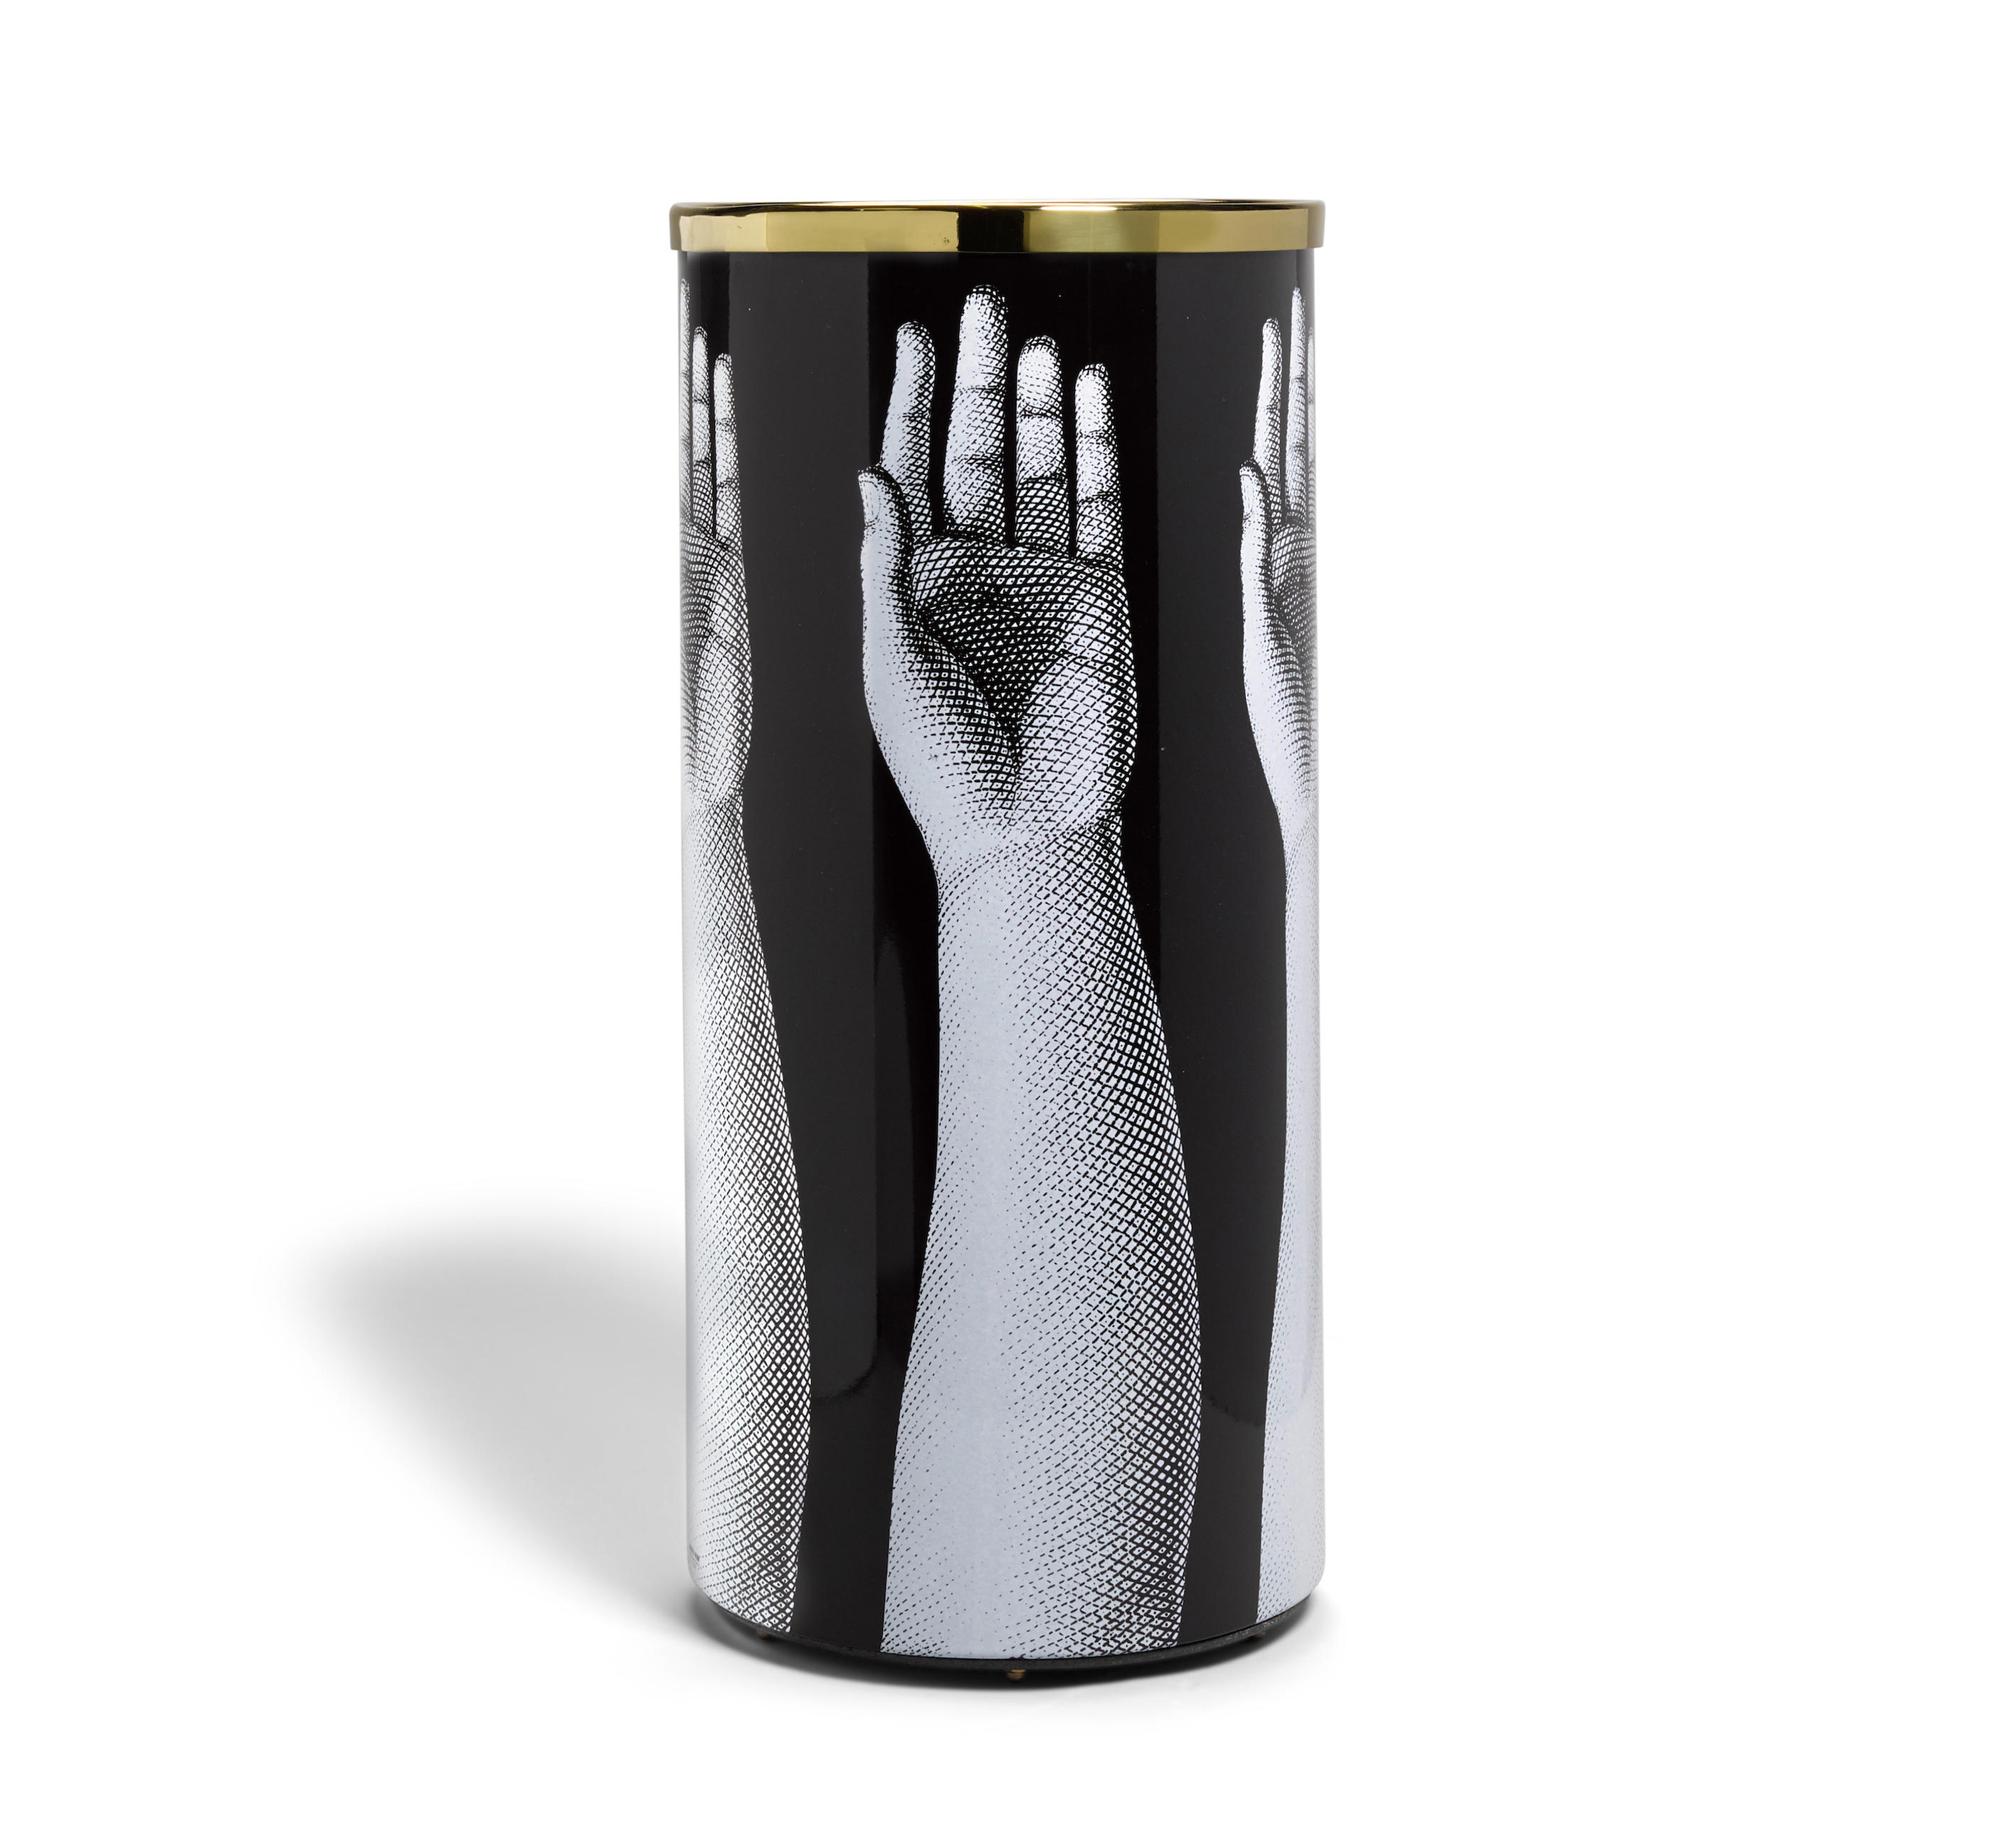 Atelier Fornasetti Mani Umbrella Stand,
Signed & Dated 2007

The Fornasetti cylindrical umbrella stand is decorated with the Mani pattern which is an extended arm on a black background.

Piero Fornasetti always attached great importance to